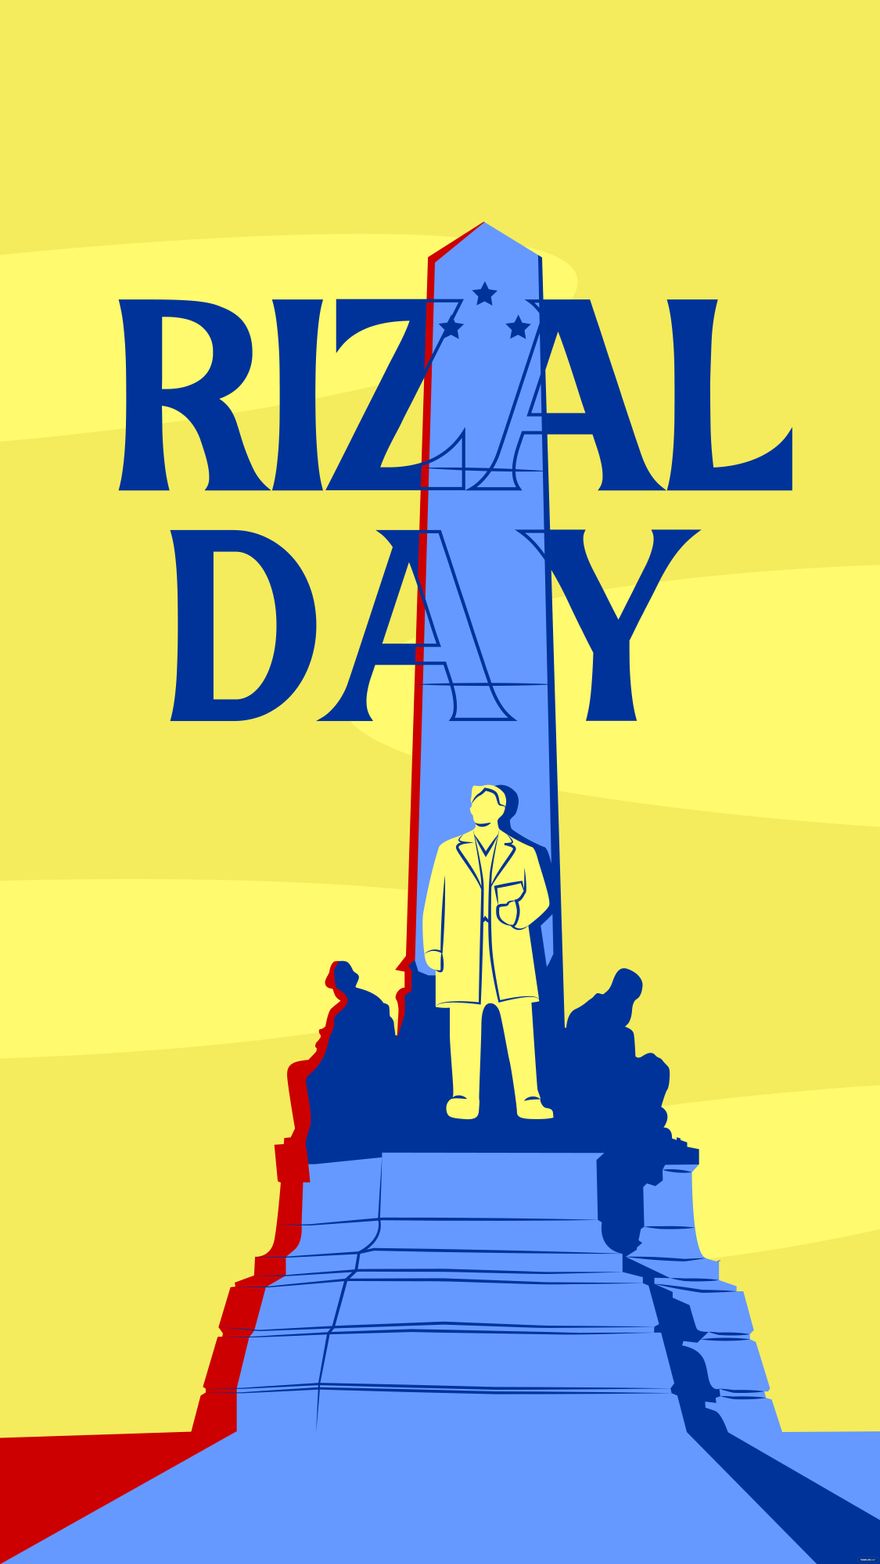 Free Rizal Day iPhone Background in PDF, Illustrator, PSD, EPS, SVG, JPG, PNG